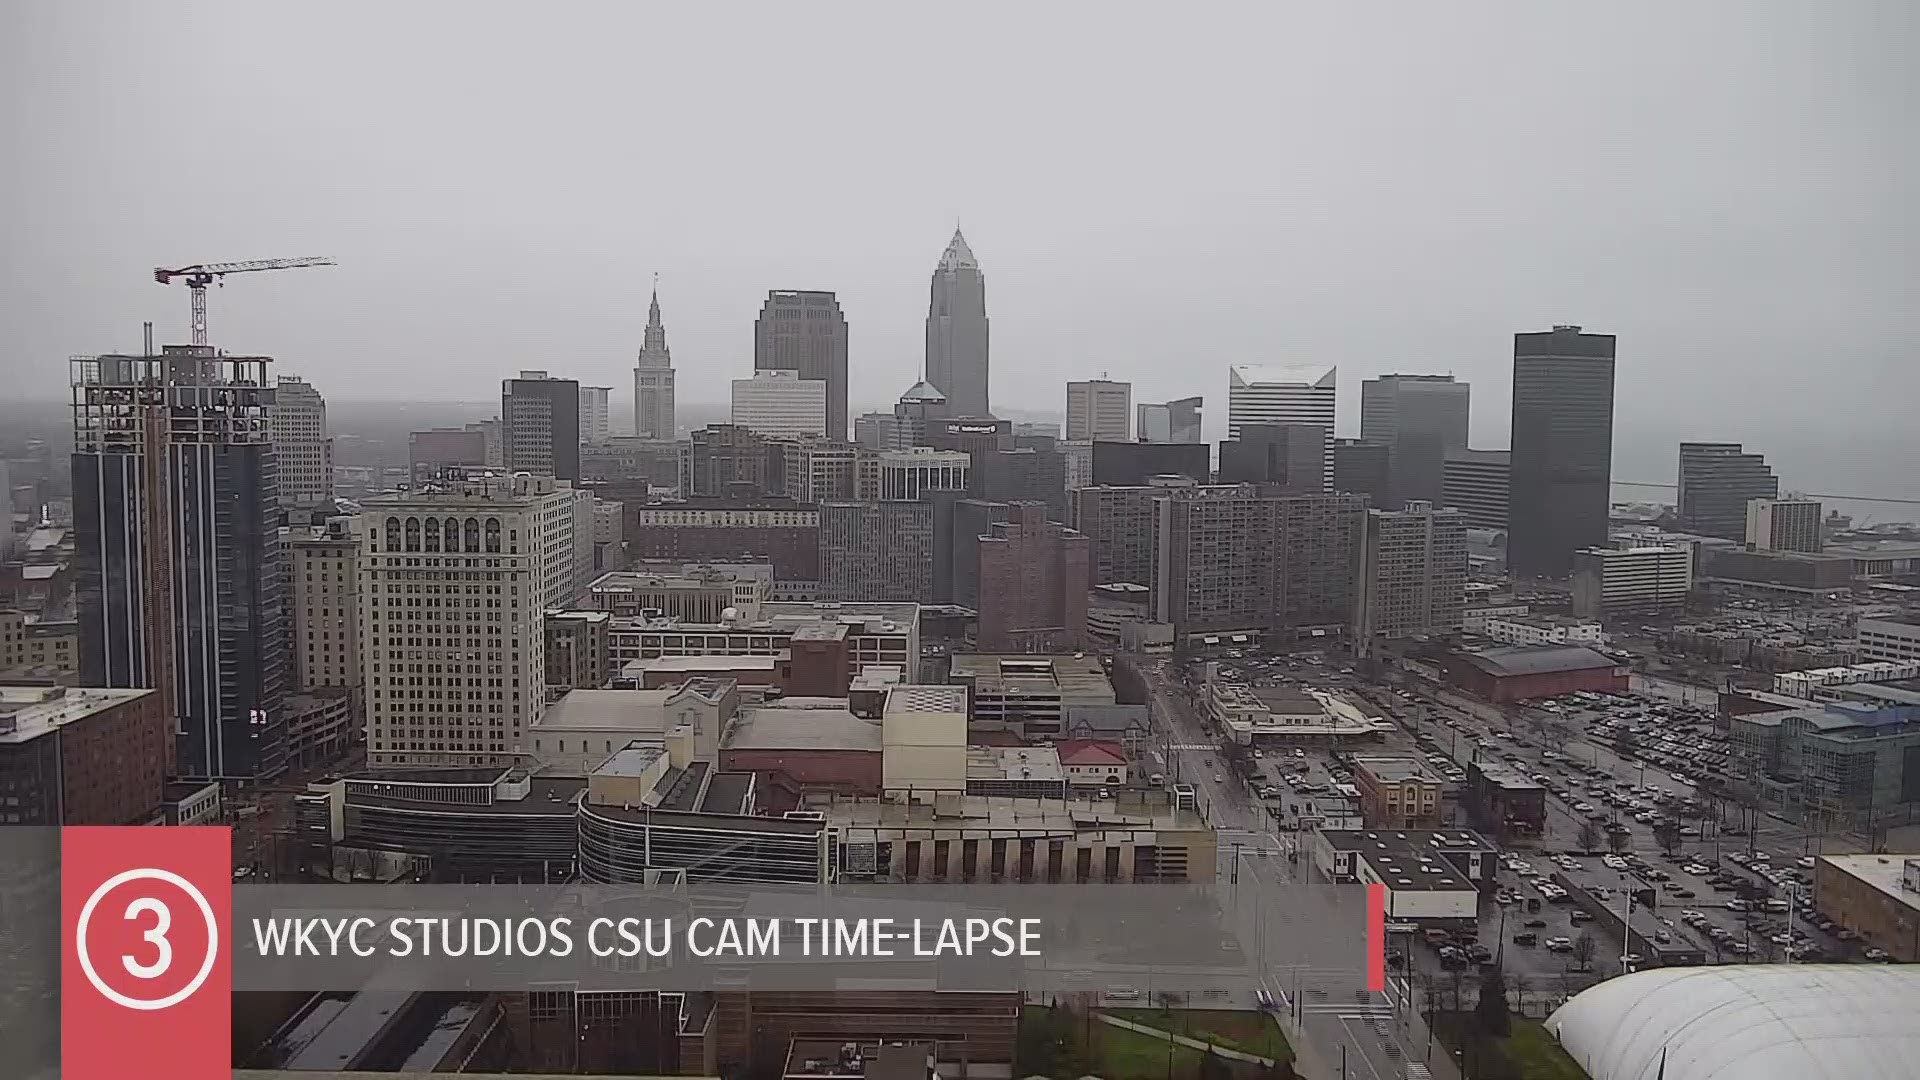 Skies were cloudy across northeast Ohio on Friday. Here's your daily 30 second weather time-lapse for the WKYC Studios CSU Cam. #3weather